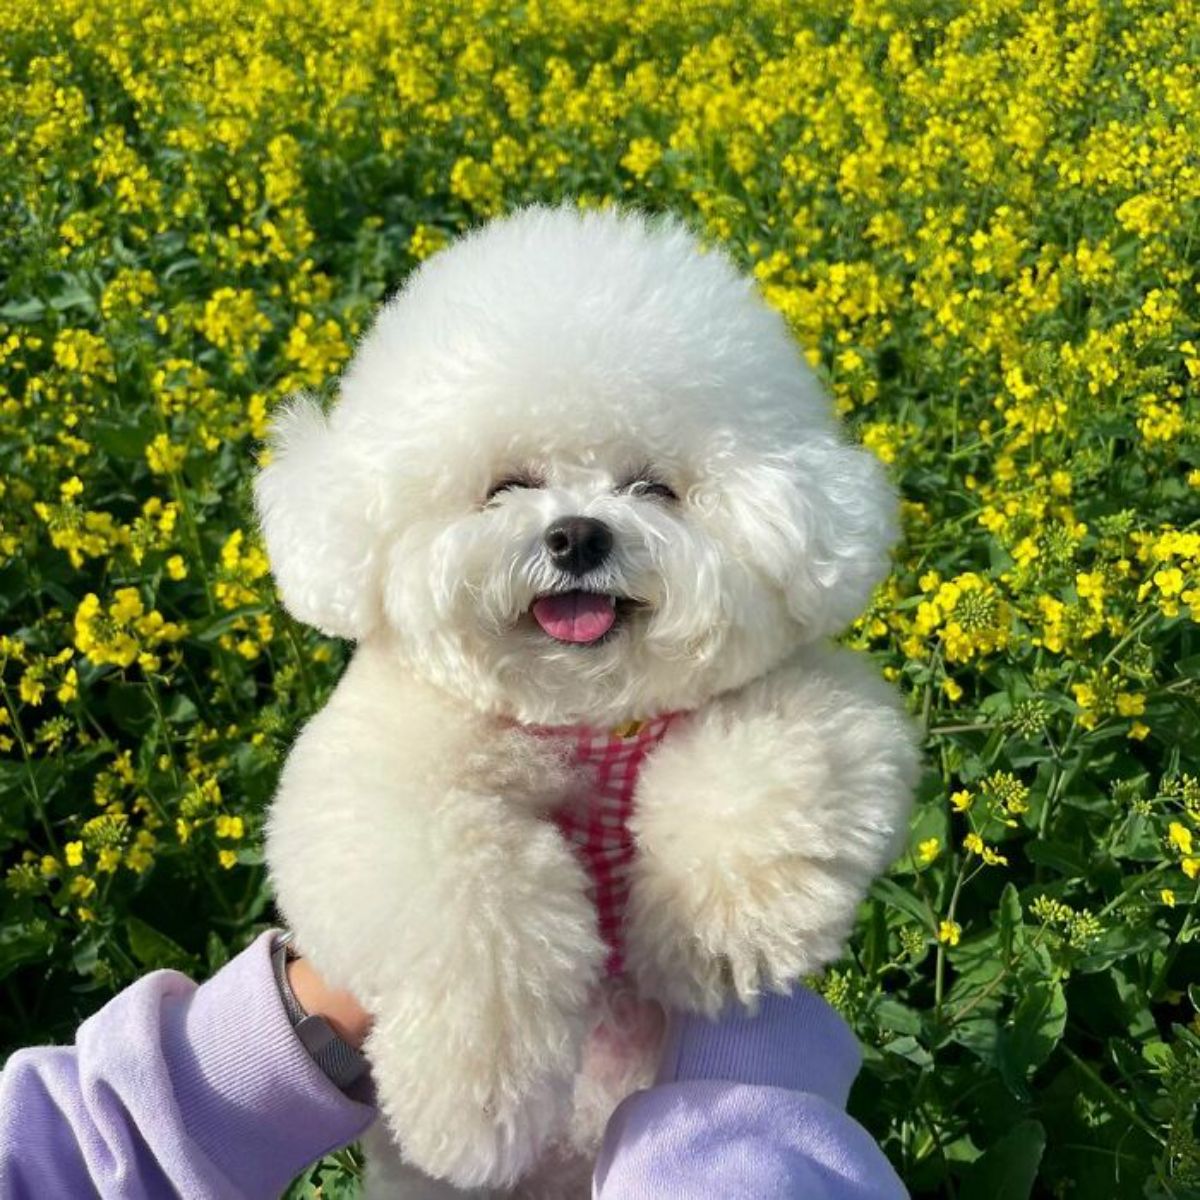 small fluffy white dog wearing red and white shirt being held up in a field of yellow flowers